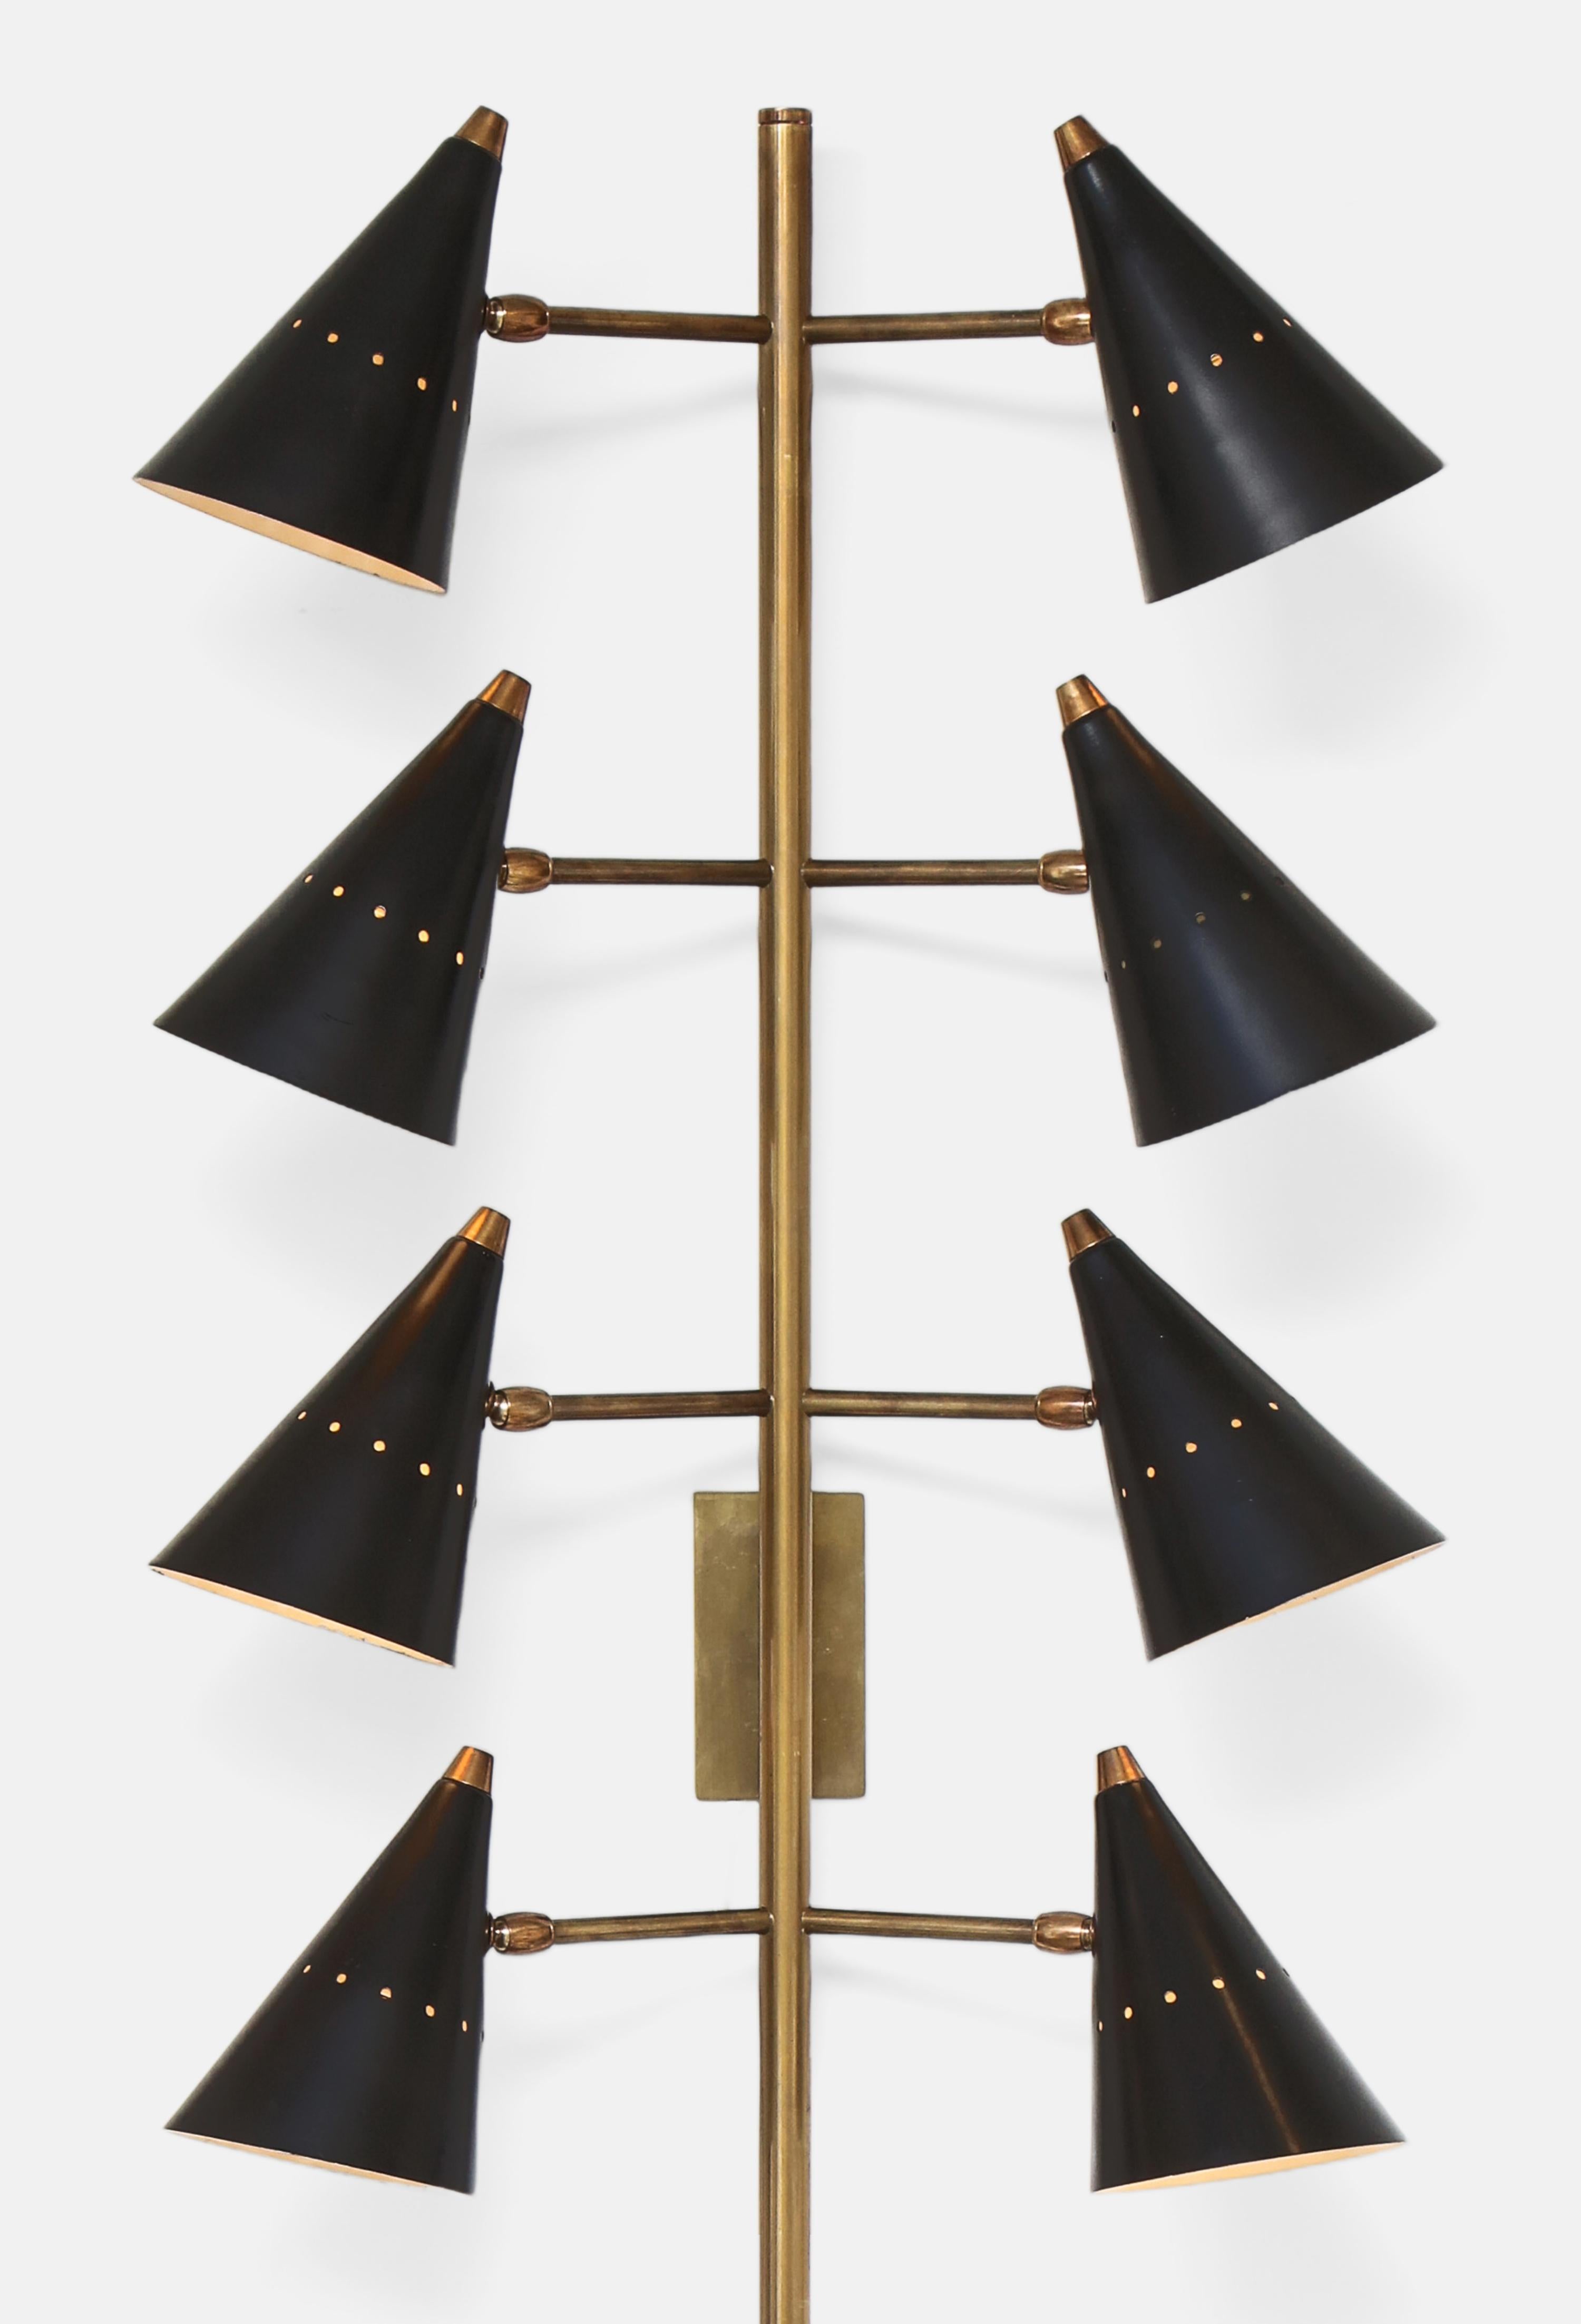 Stilnovo rare and stunning monumental pair of eight-arm wall lights with articulating conical shades in black lacquered aluminum suspended on brass arms and mounted long stem, Italy, 1950s. These original Stilnovo modernist wall lights are